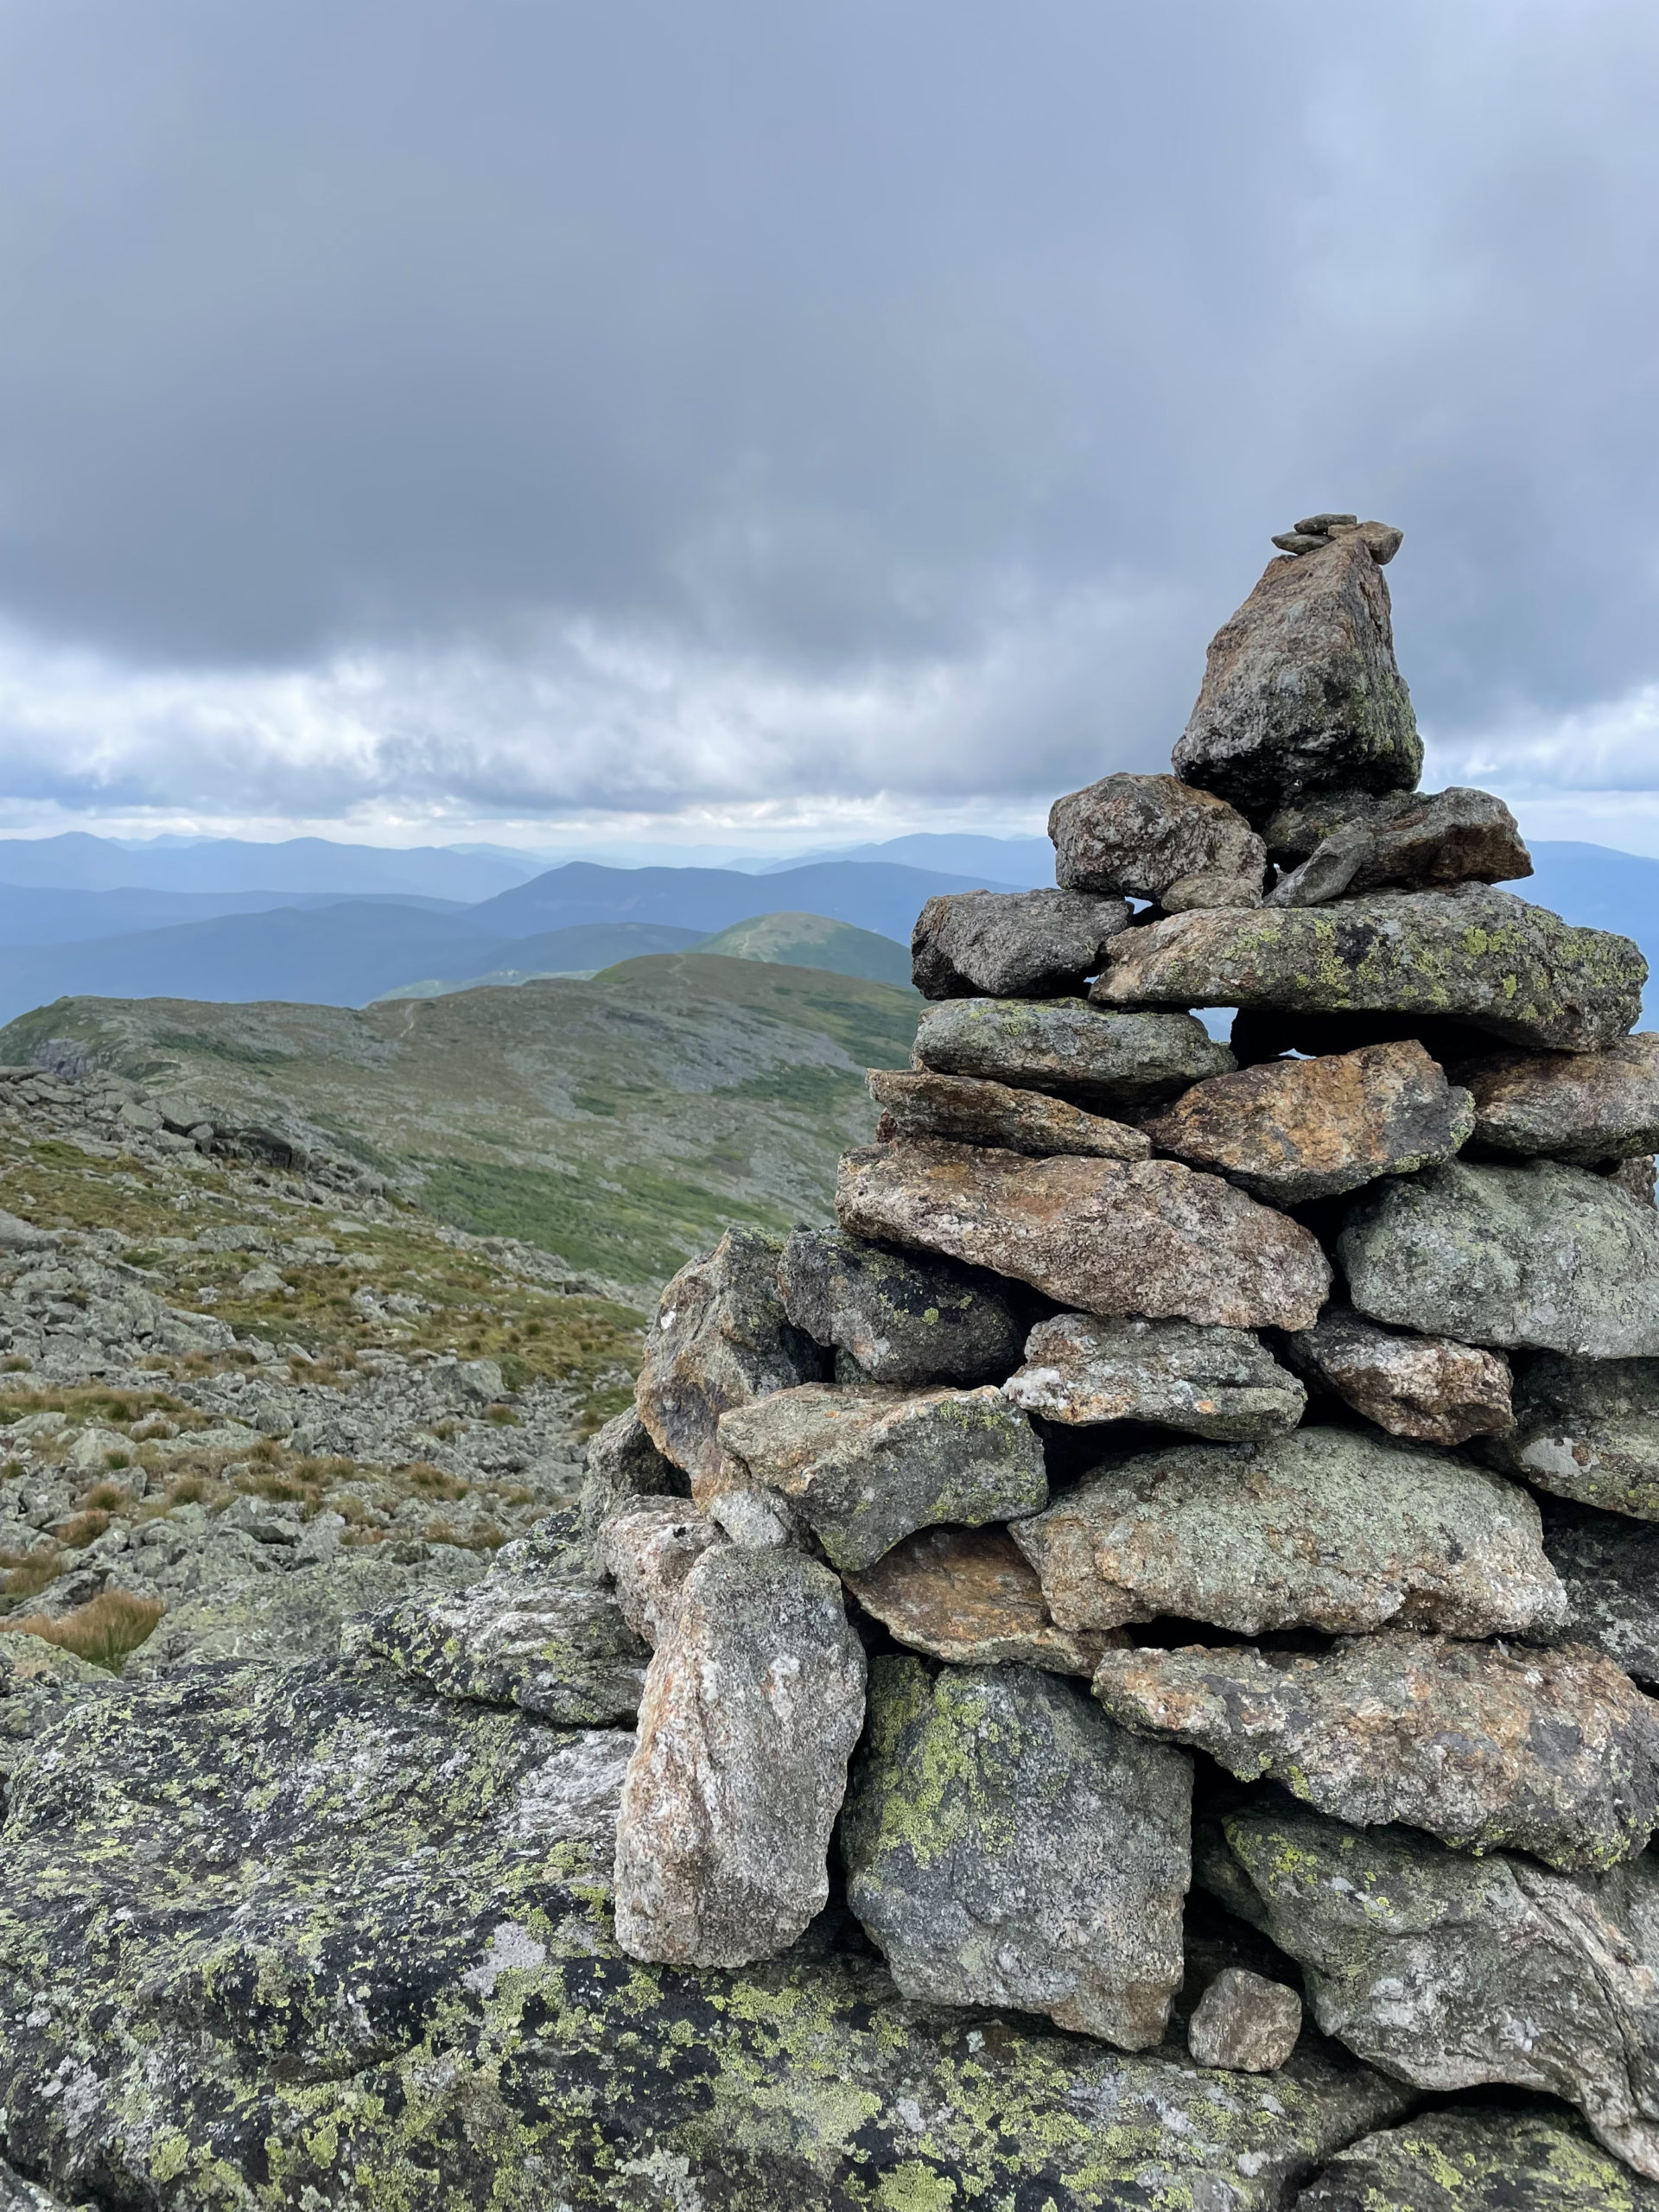 Cairn on Mt. Monroe, seen while hiking Mt. Pierce and Mt. Jackson in the White Mountains National Forest, New Hampshire